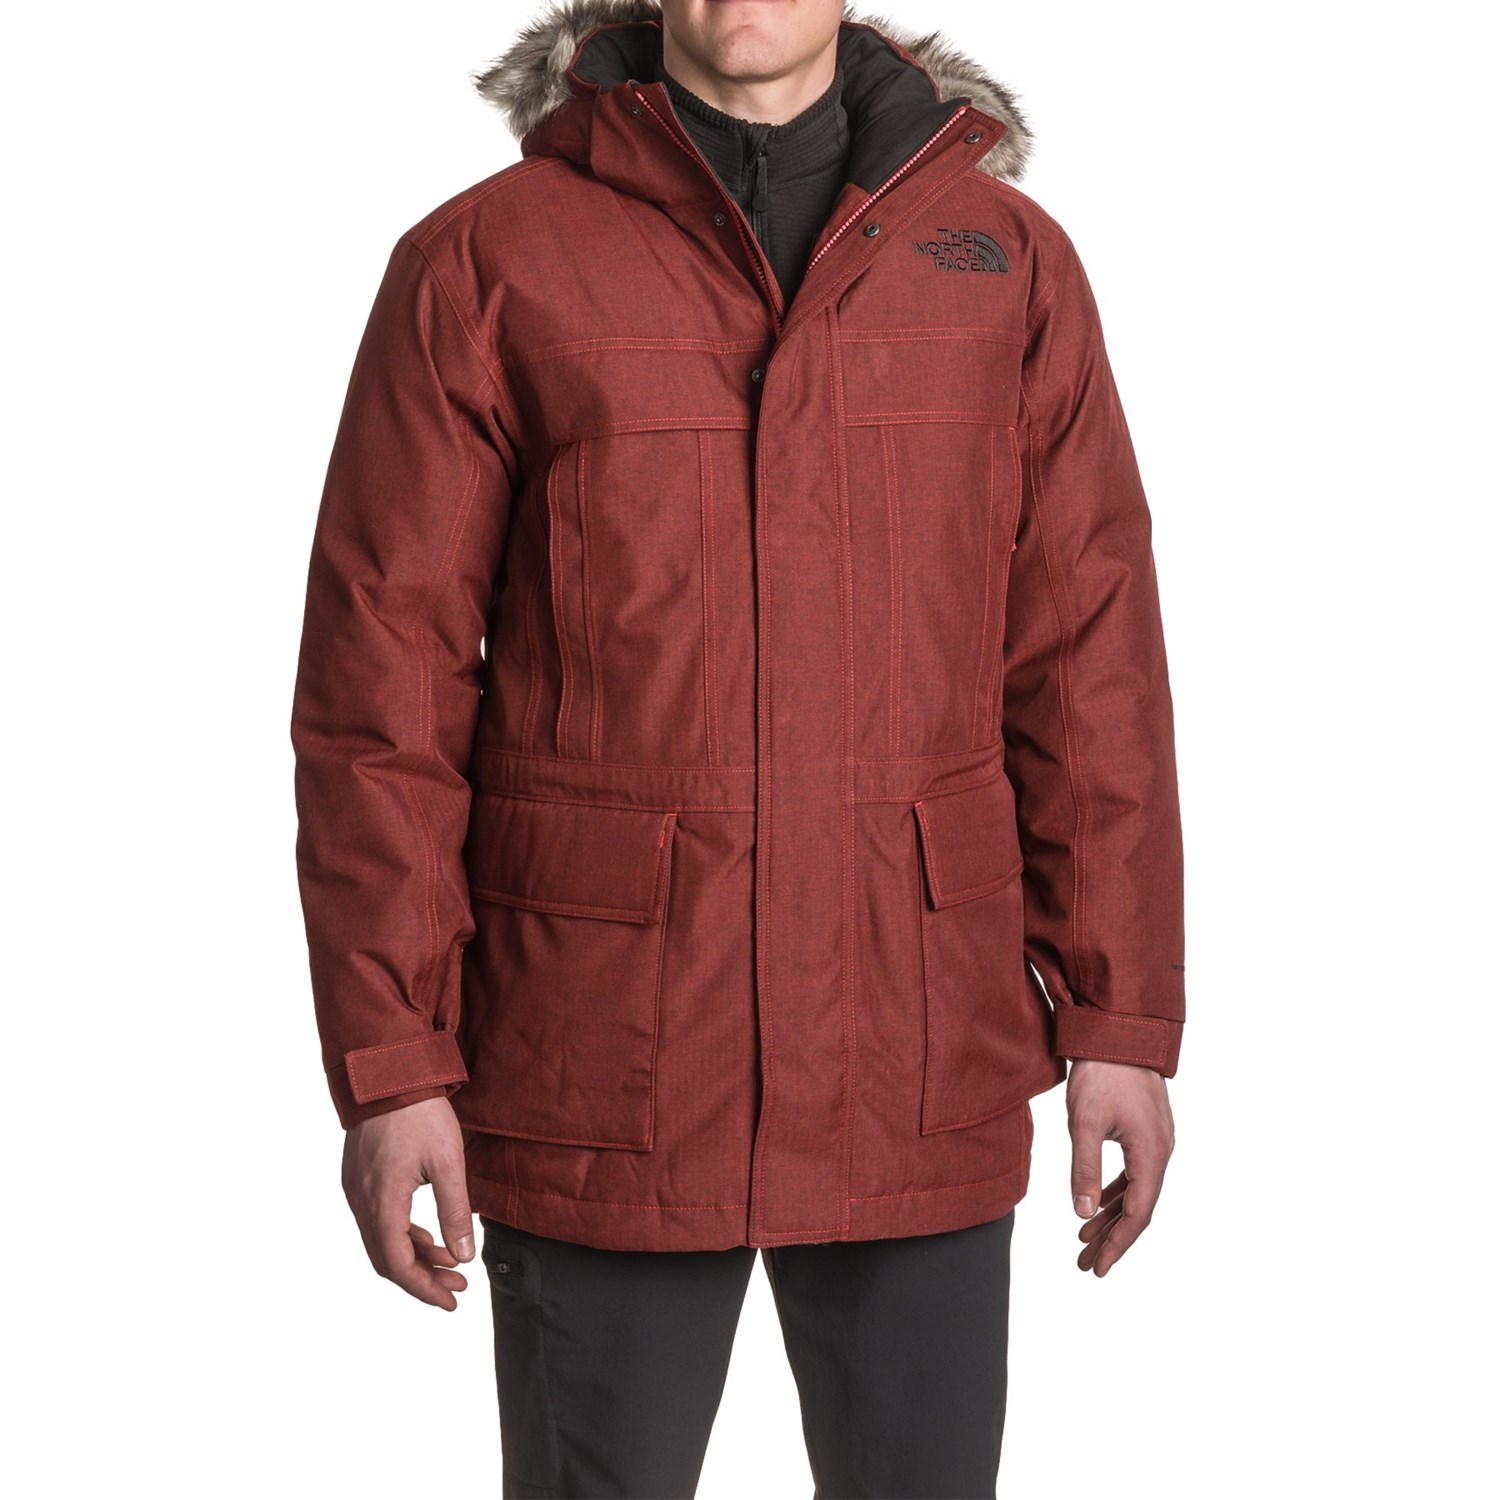 The North Face McMurdo 2 Down Parka – 550 Fill Power (For Men)